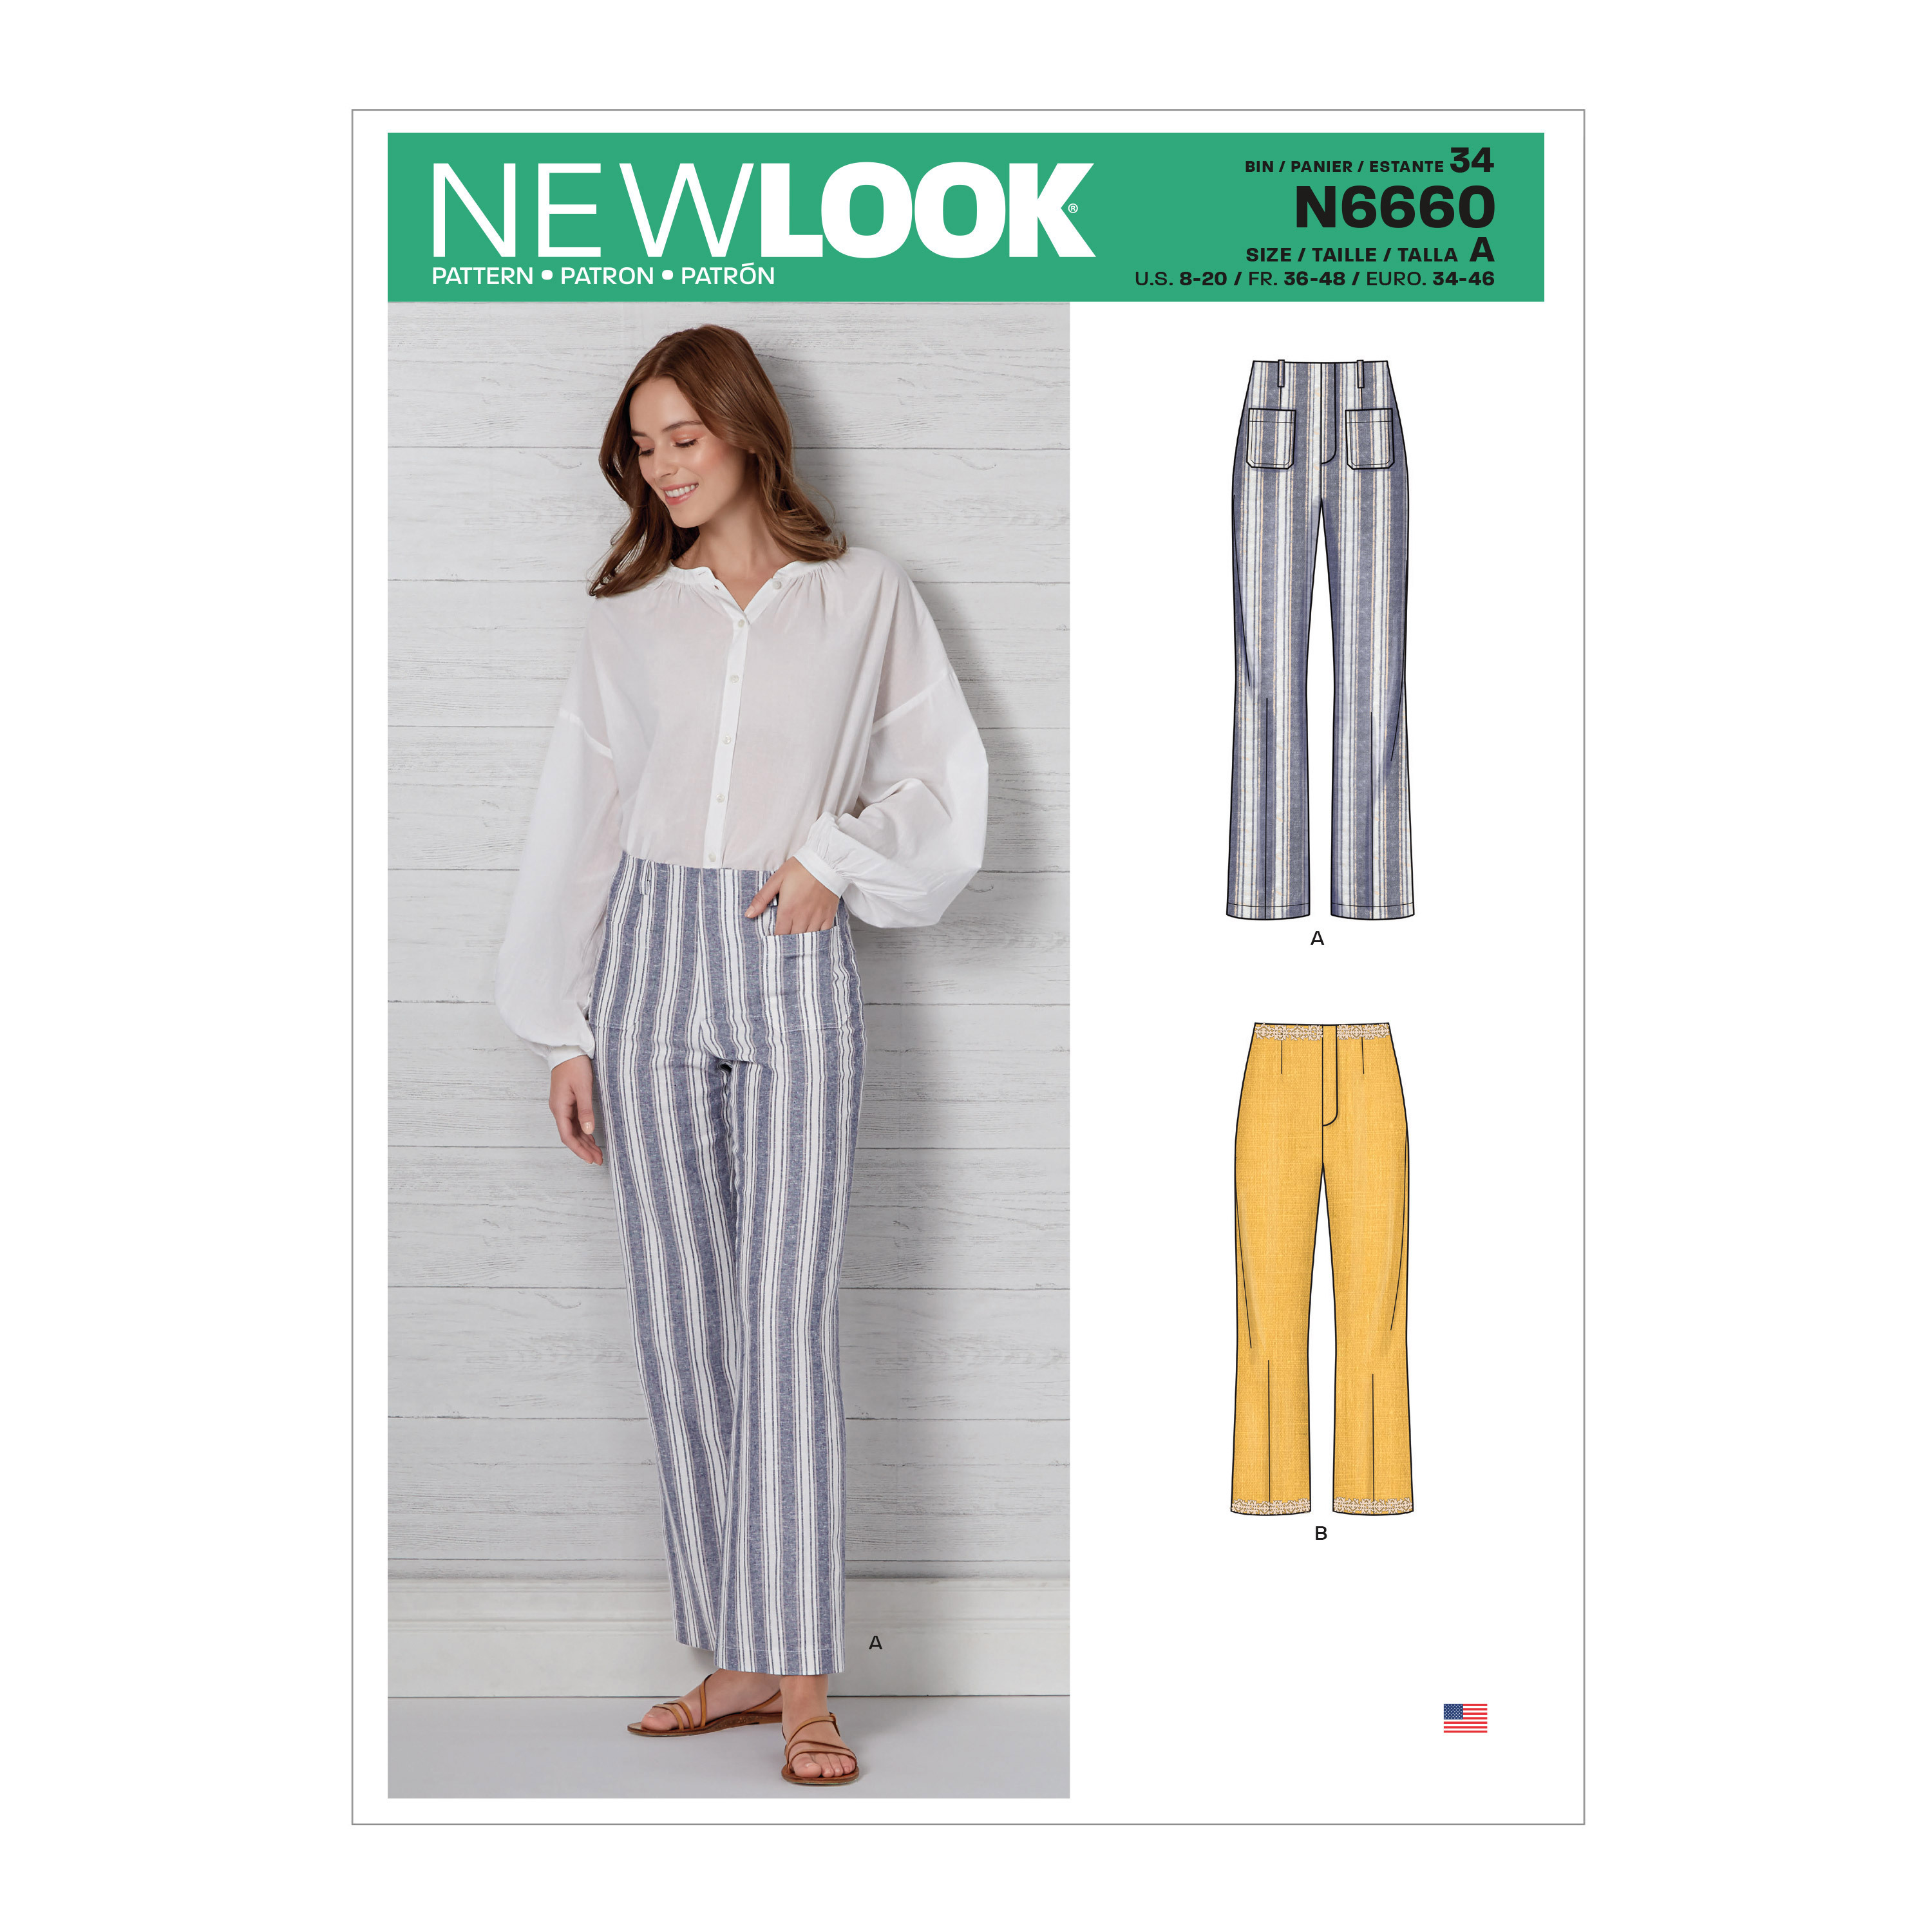 New Look Sewing Pattern N6660 Misses' High Waisted Flared